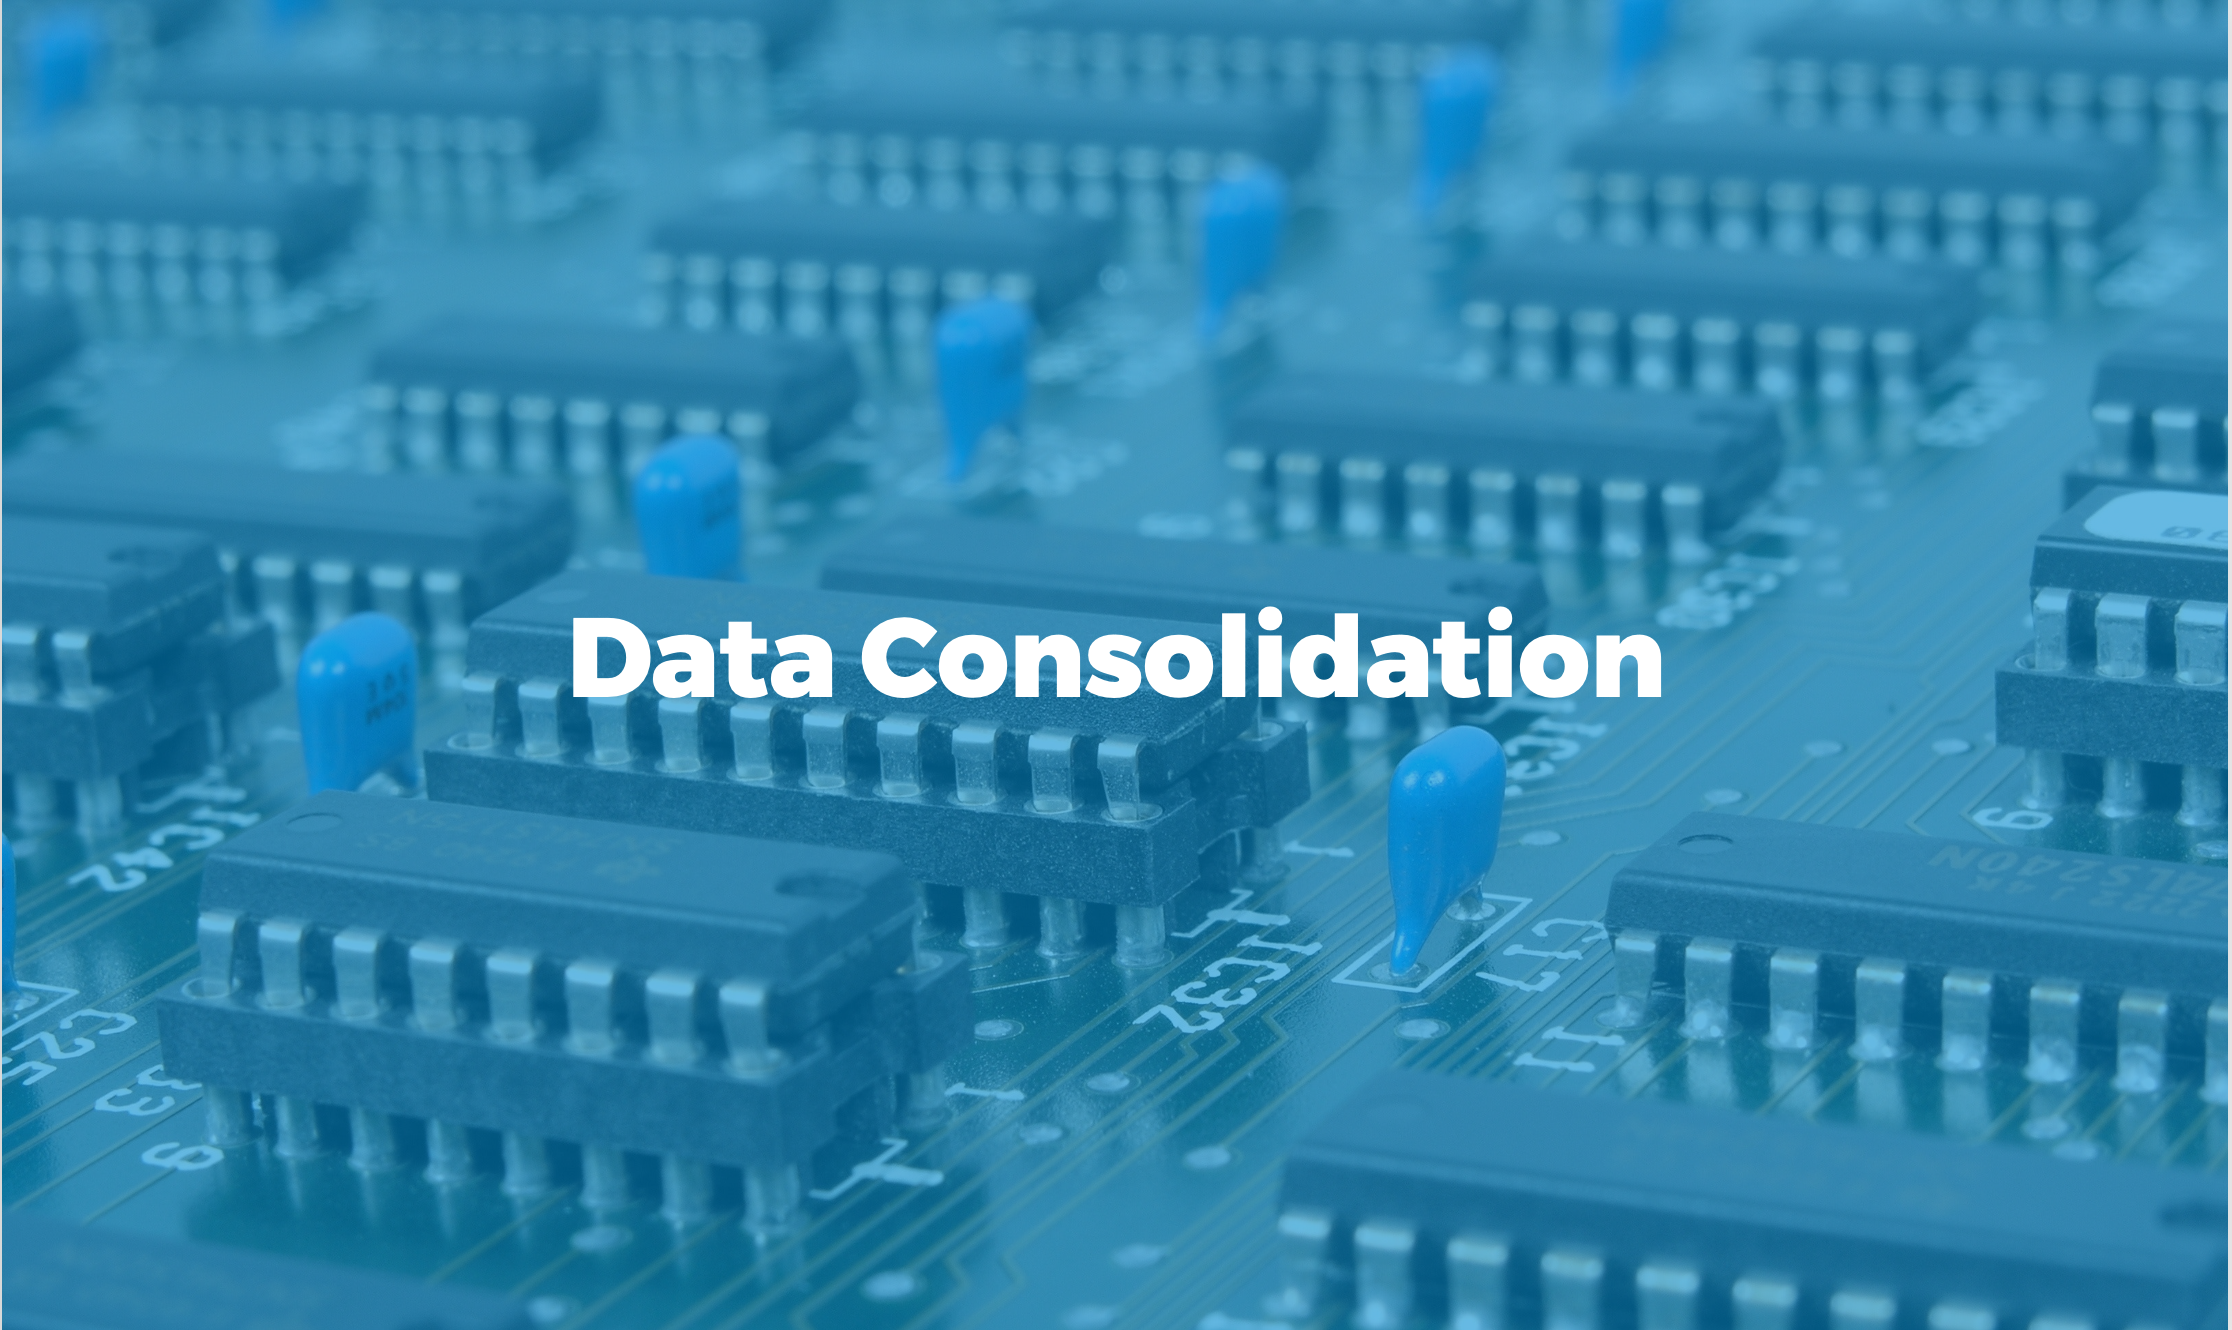 What Is Data Consolidation and Why Is It Important?